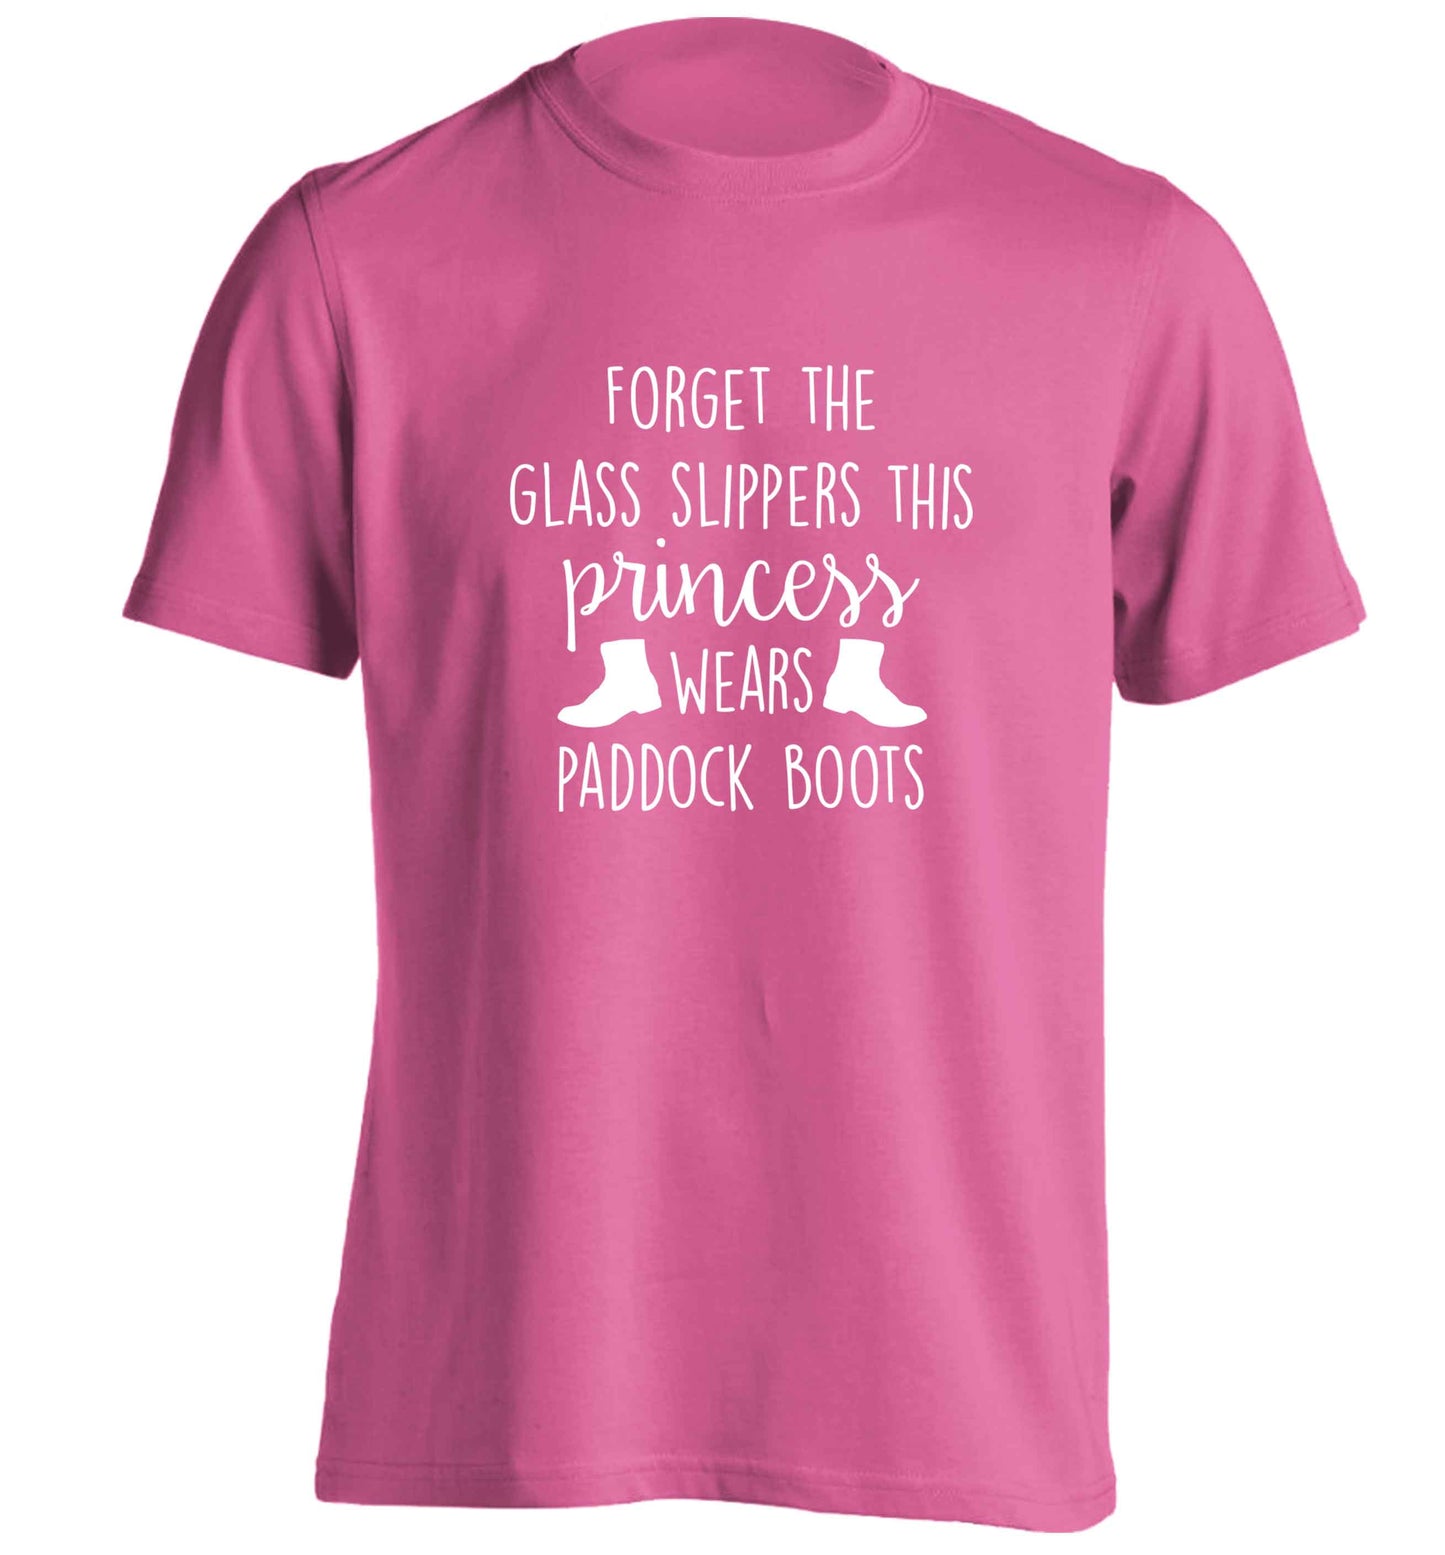 Forget the glass slippers this princess wears paddock boots adults unisex pink Tshirt 2XL